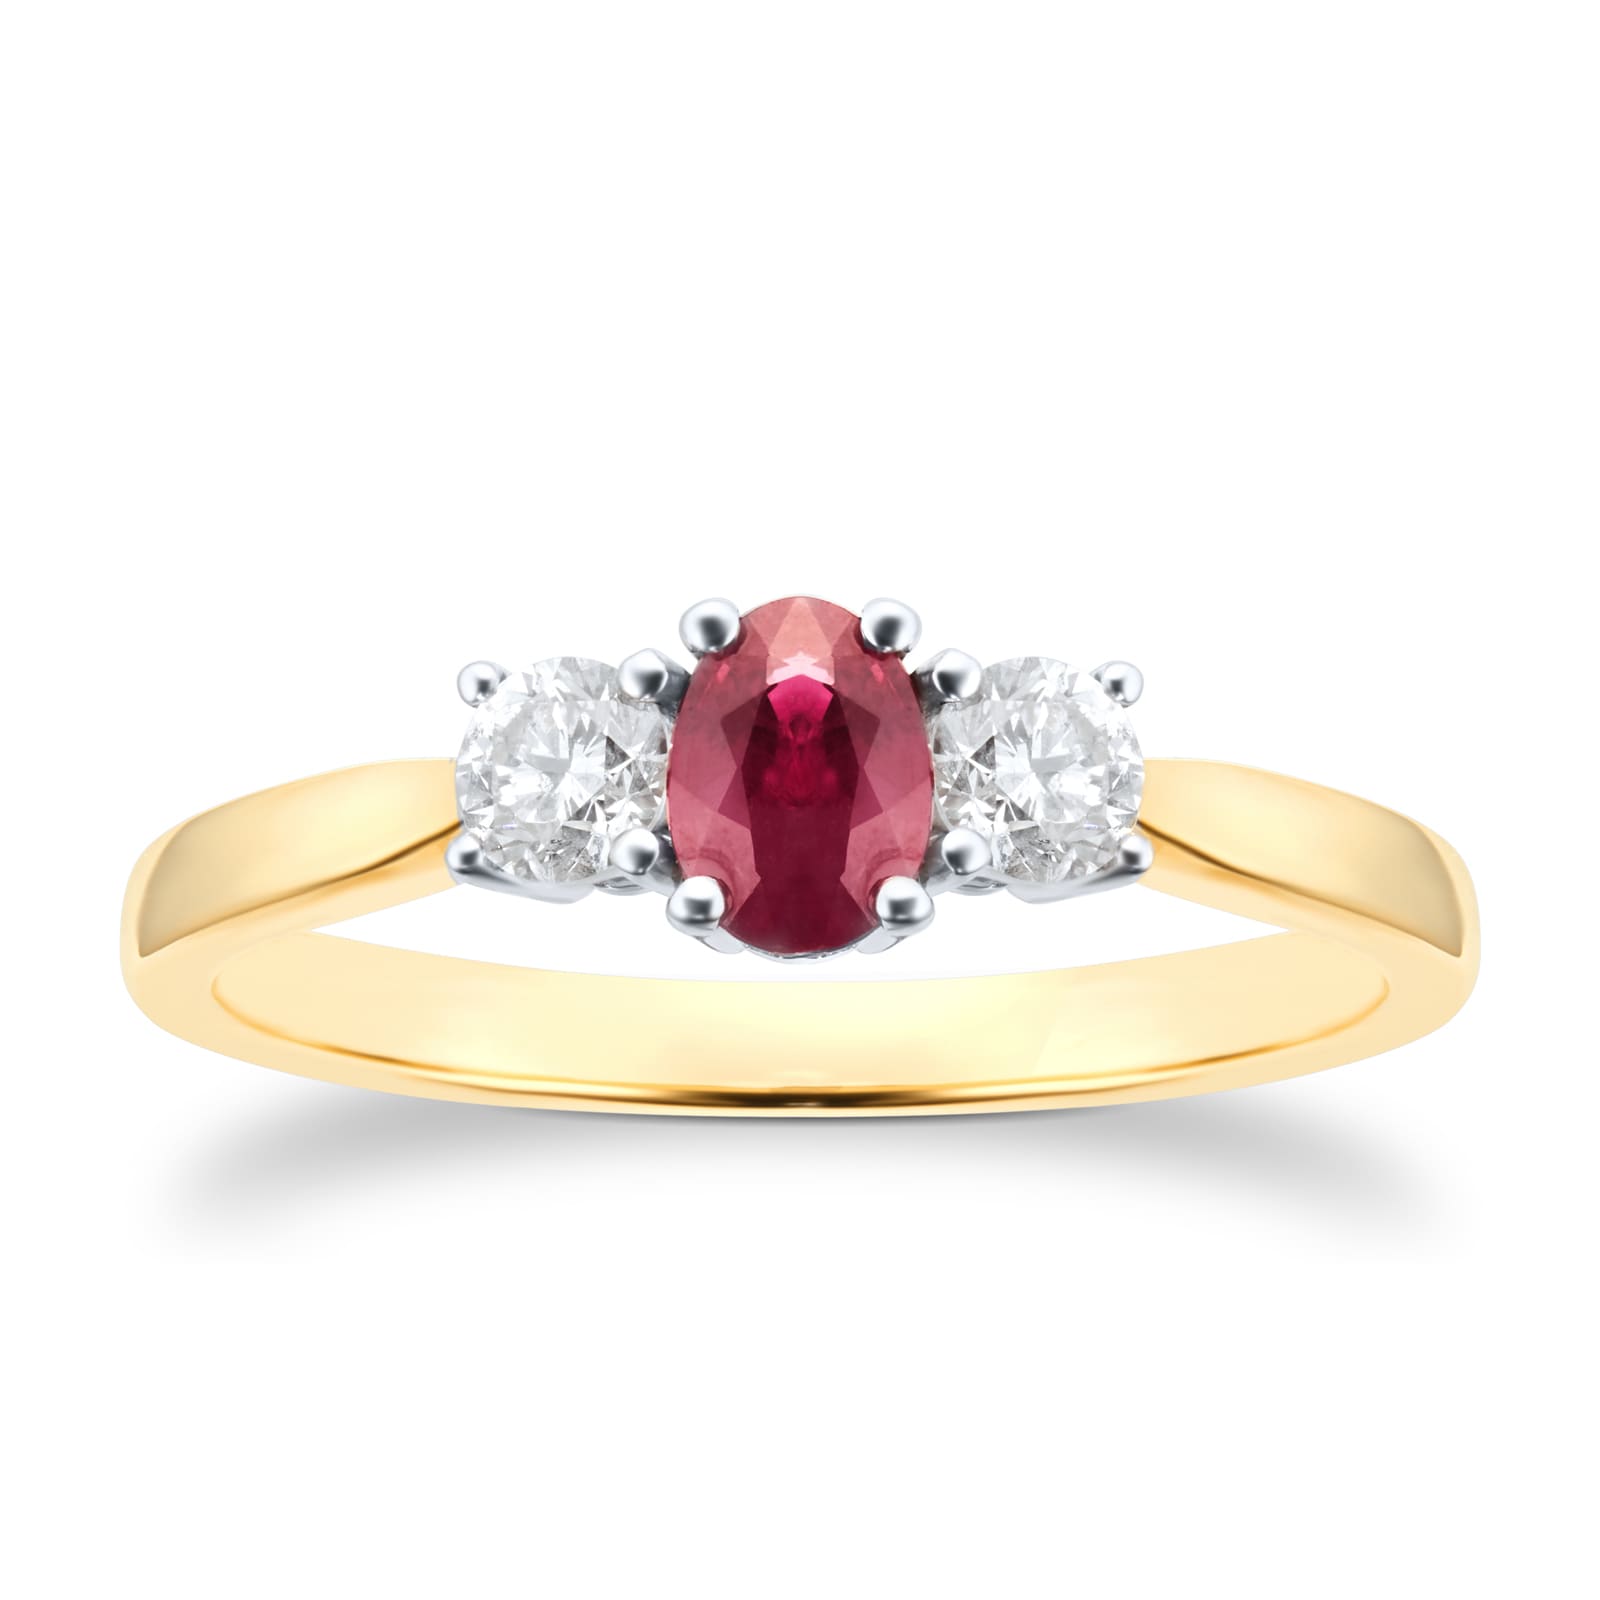 9ct Yellow and White Gold 3 Stone Ruby & Diamond Ring - Ring Size E